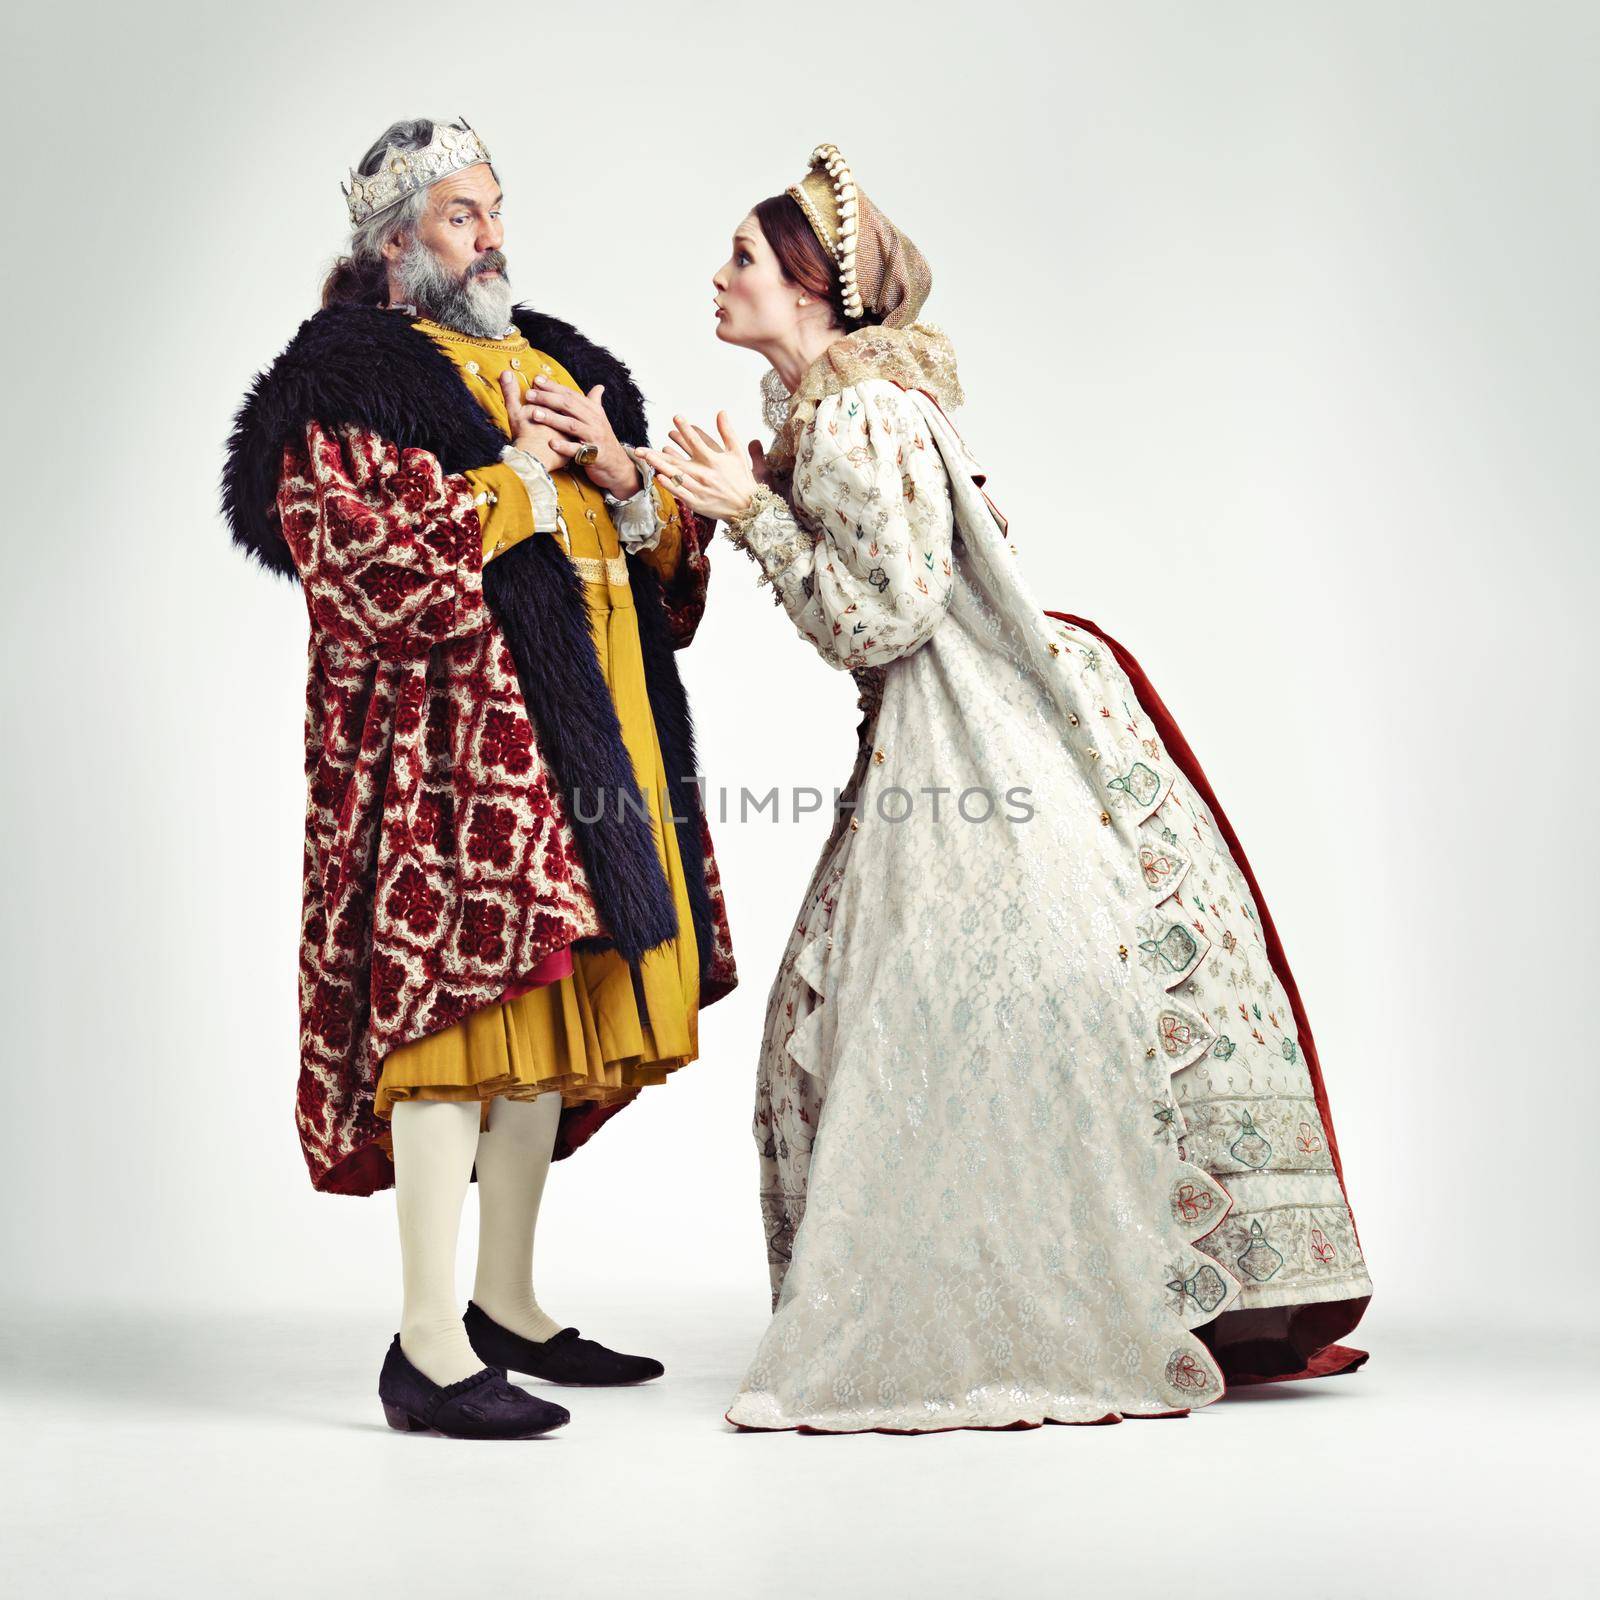 The Queen gets what she wants. Studio shot of a king and queen arguing. by YuriArcurs